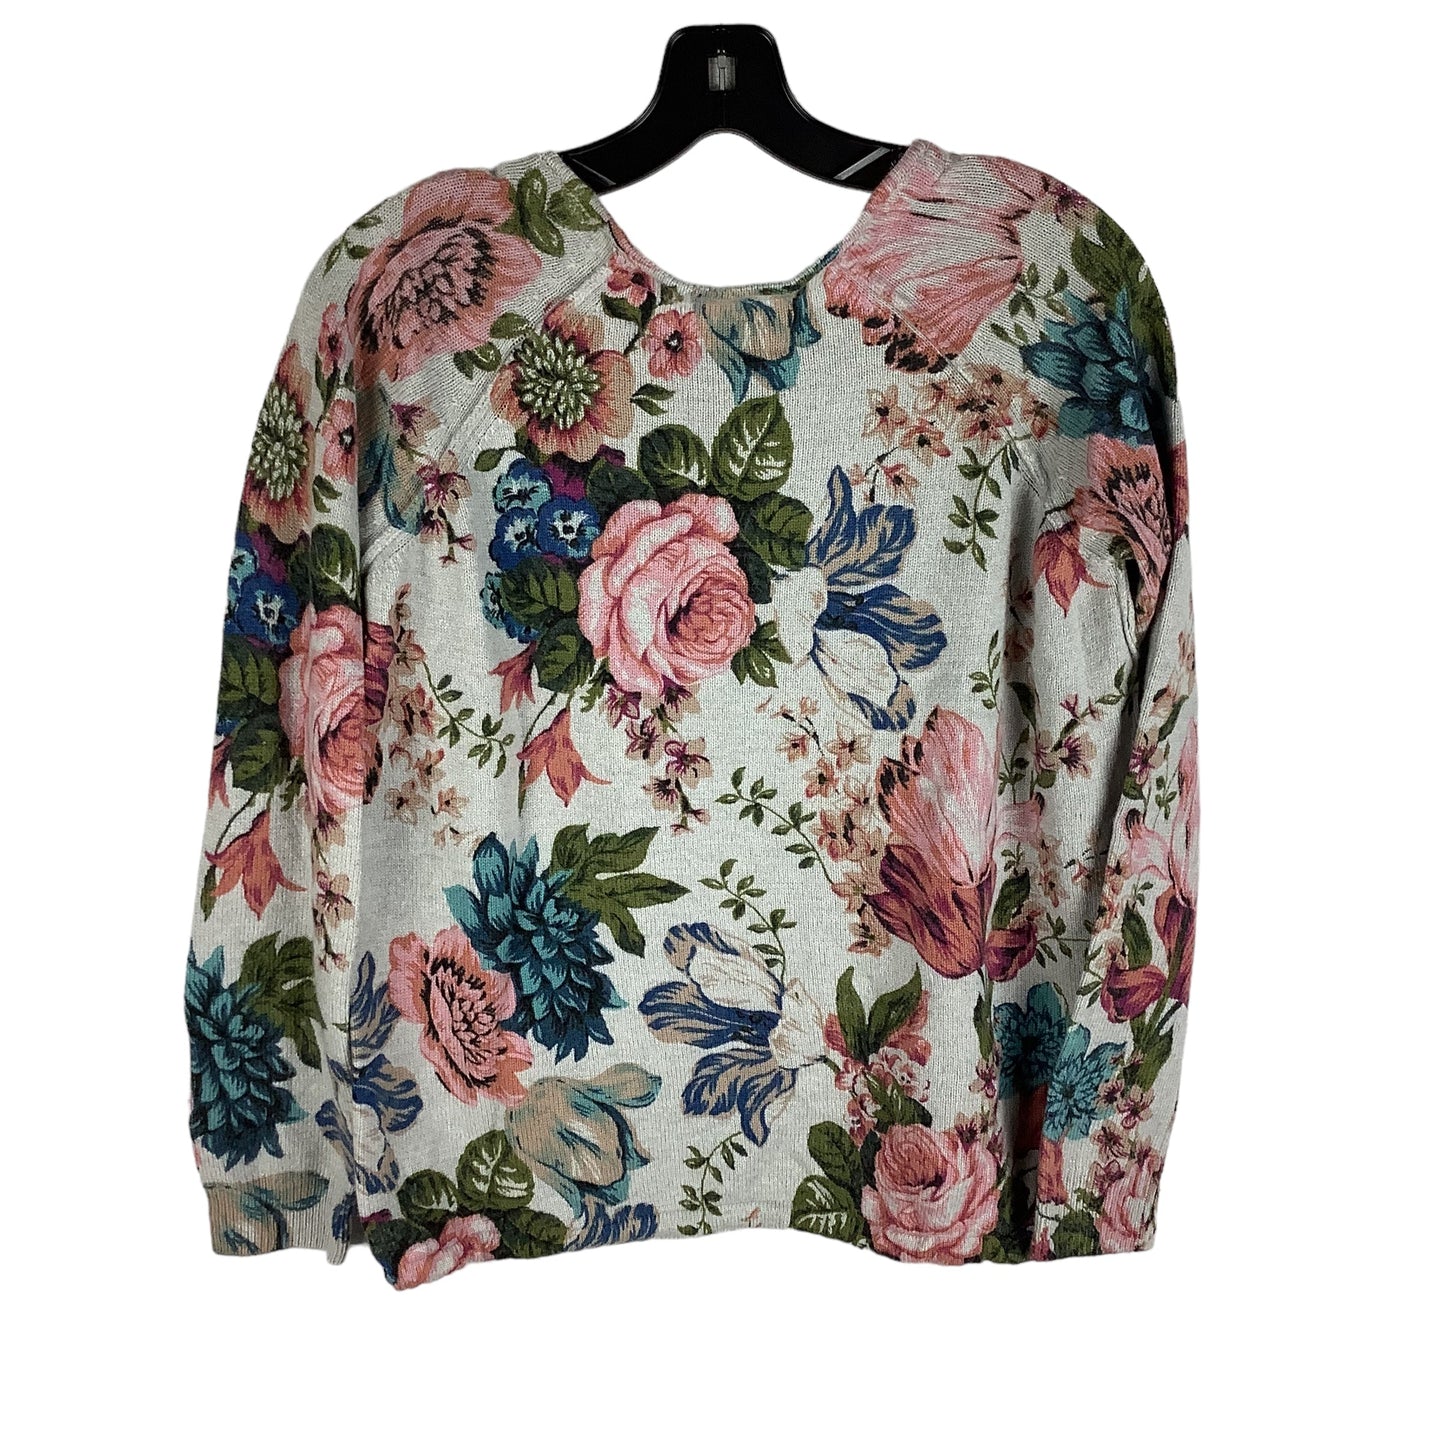 Floral Print Sweater Anthropologie, Size Xs